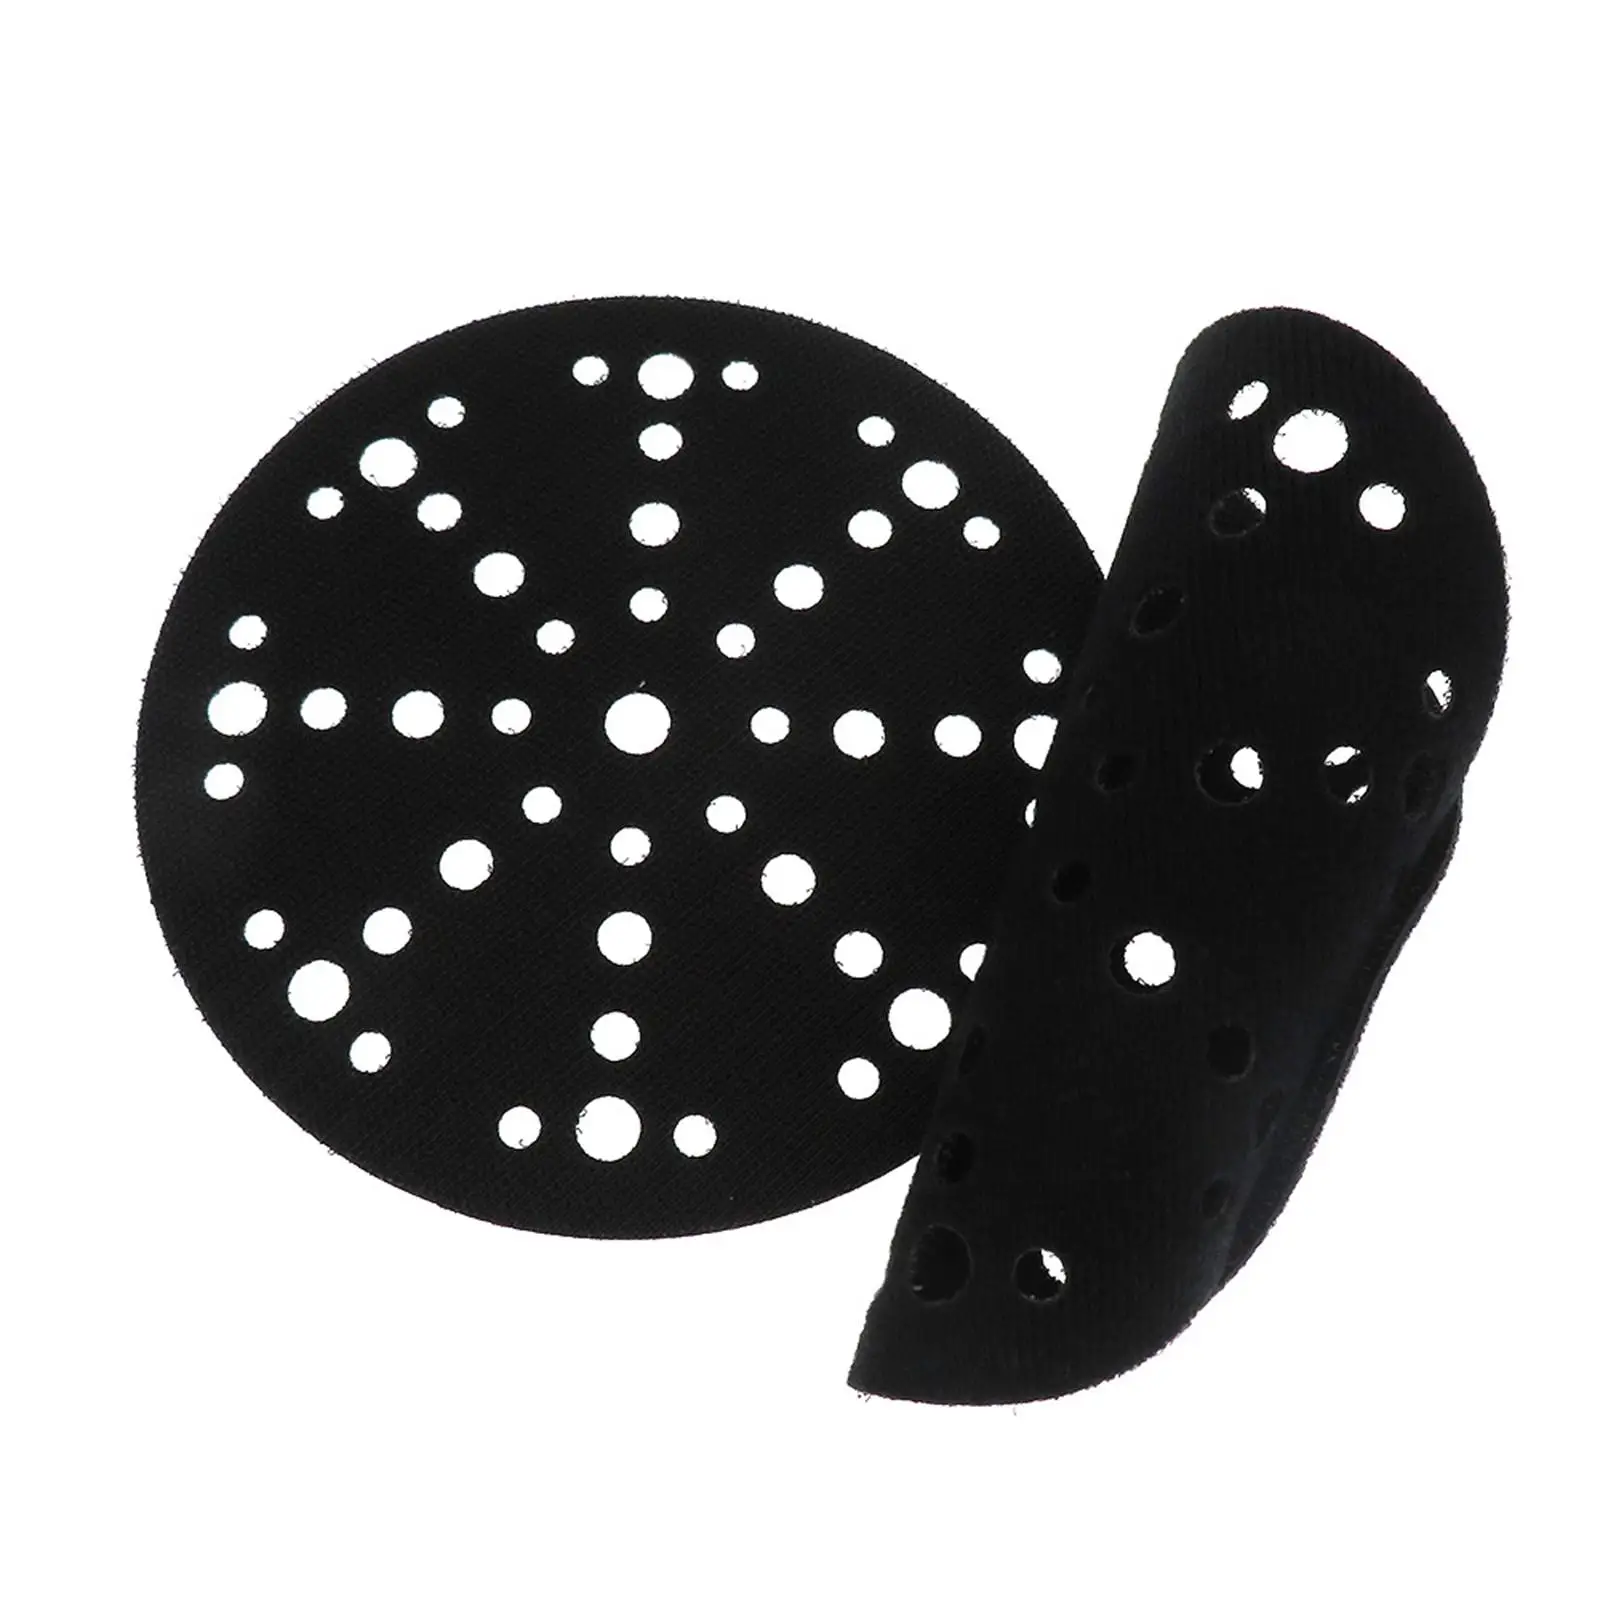 2x Polishing Backing Pads 150mm 48 Hole Durable Polisher Tools Grinding Plates Sander Polisher Tool for Grinder Accessories